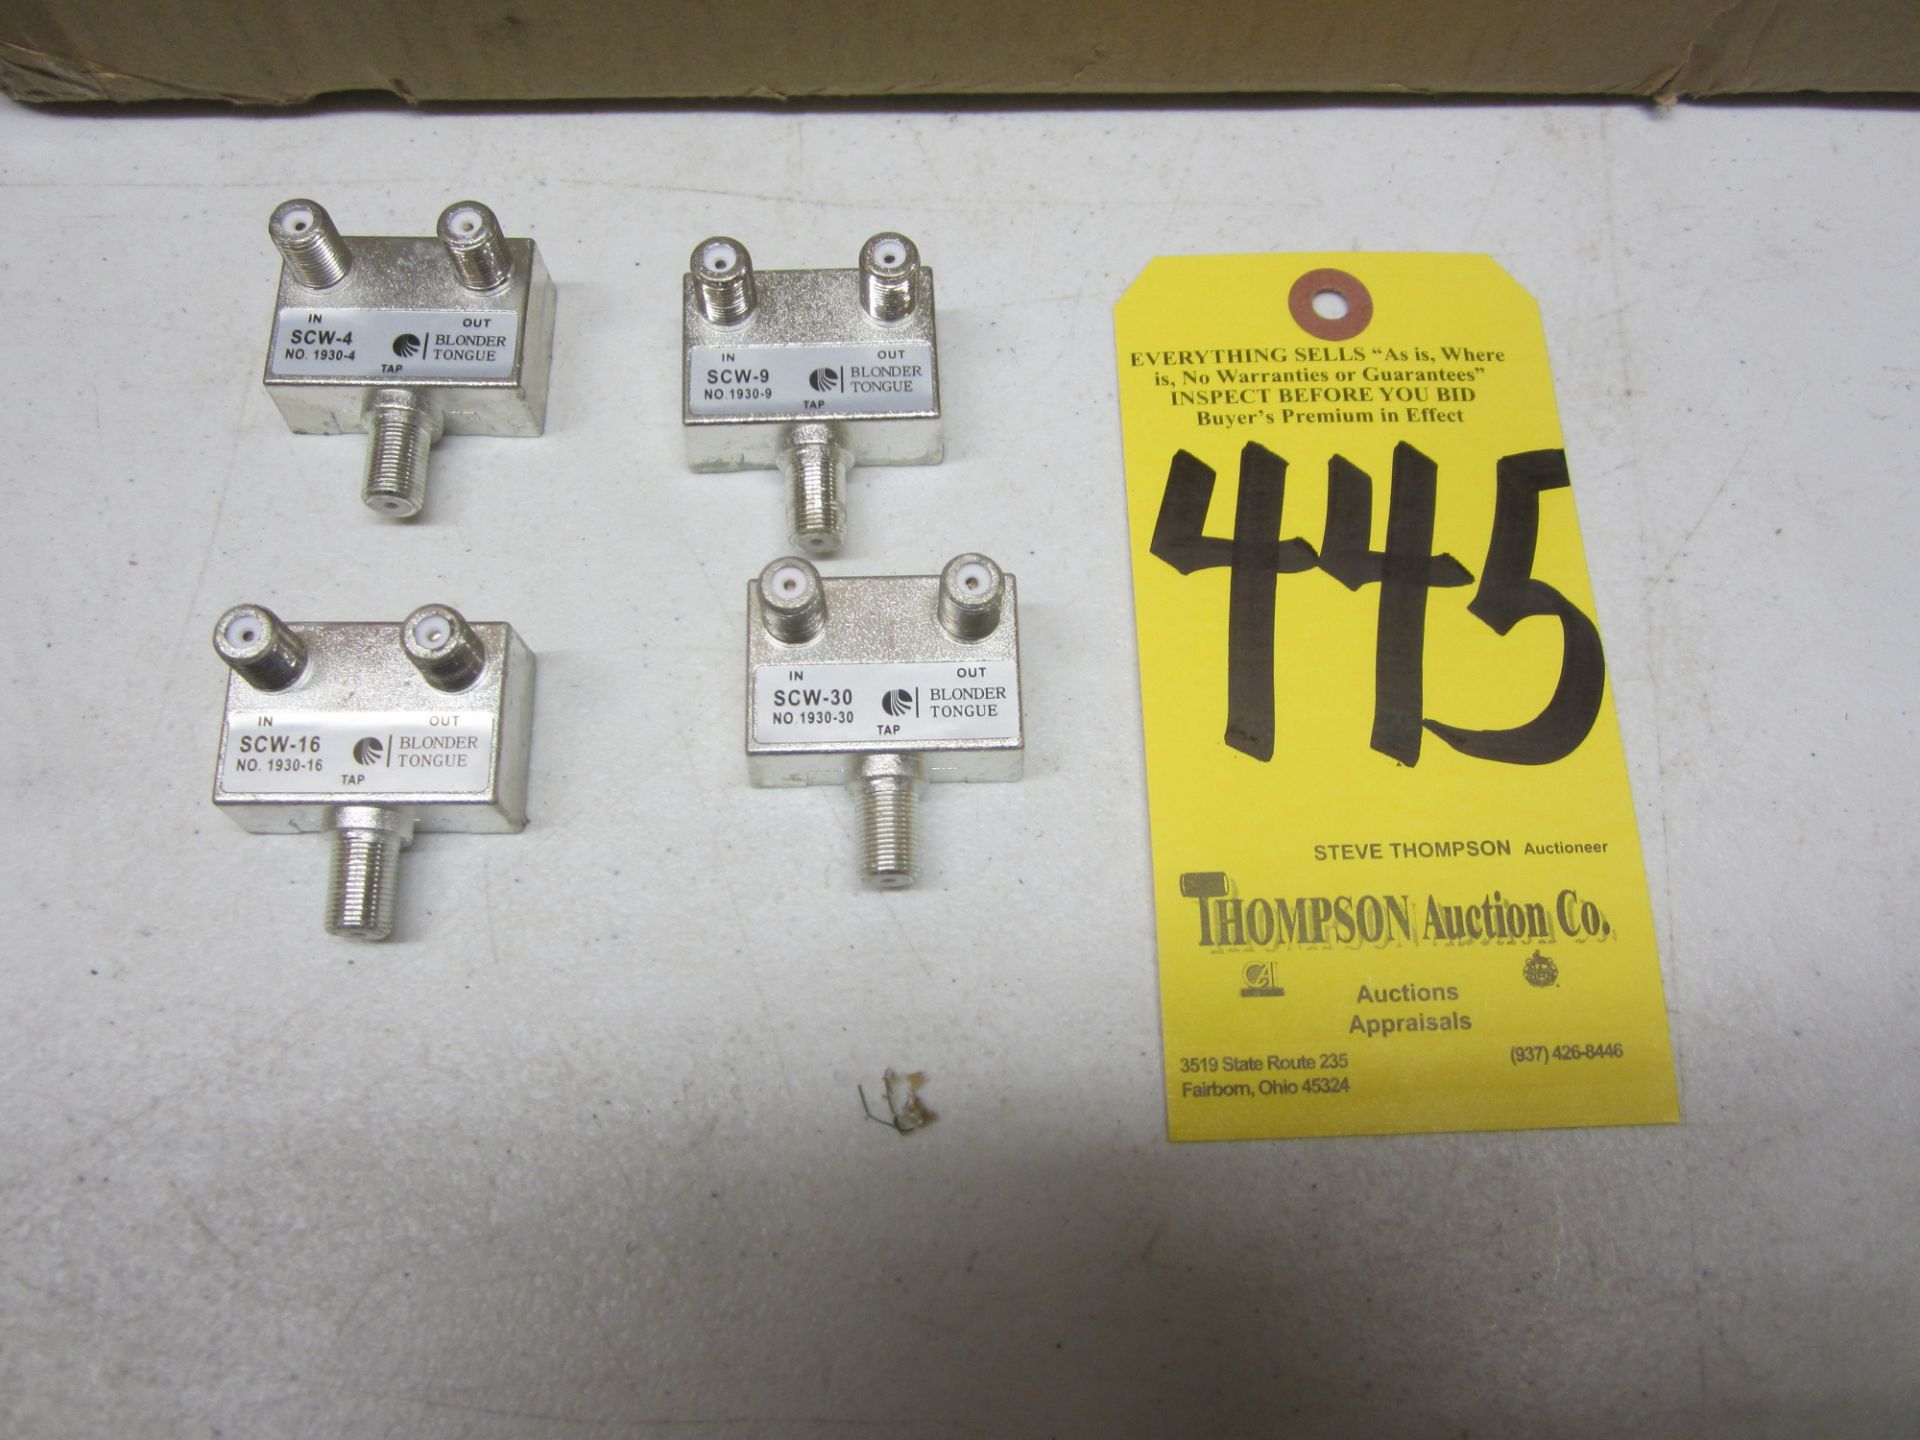 Directional Cable Couplers, (75) SCW-4, (25) SCW-6, (10) SCW-9, (20) SCW-16, and (12) SCW-30